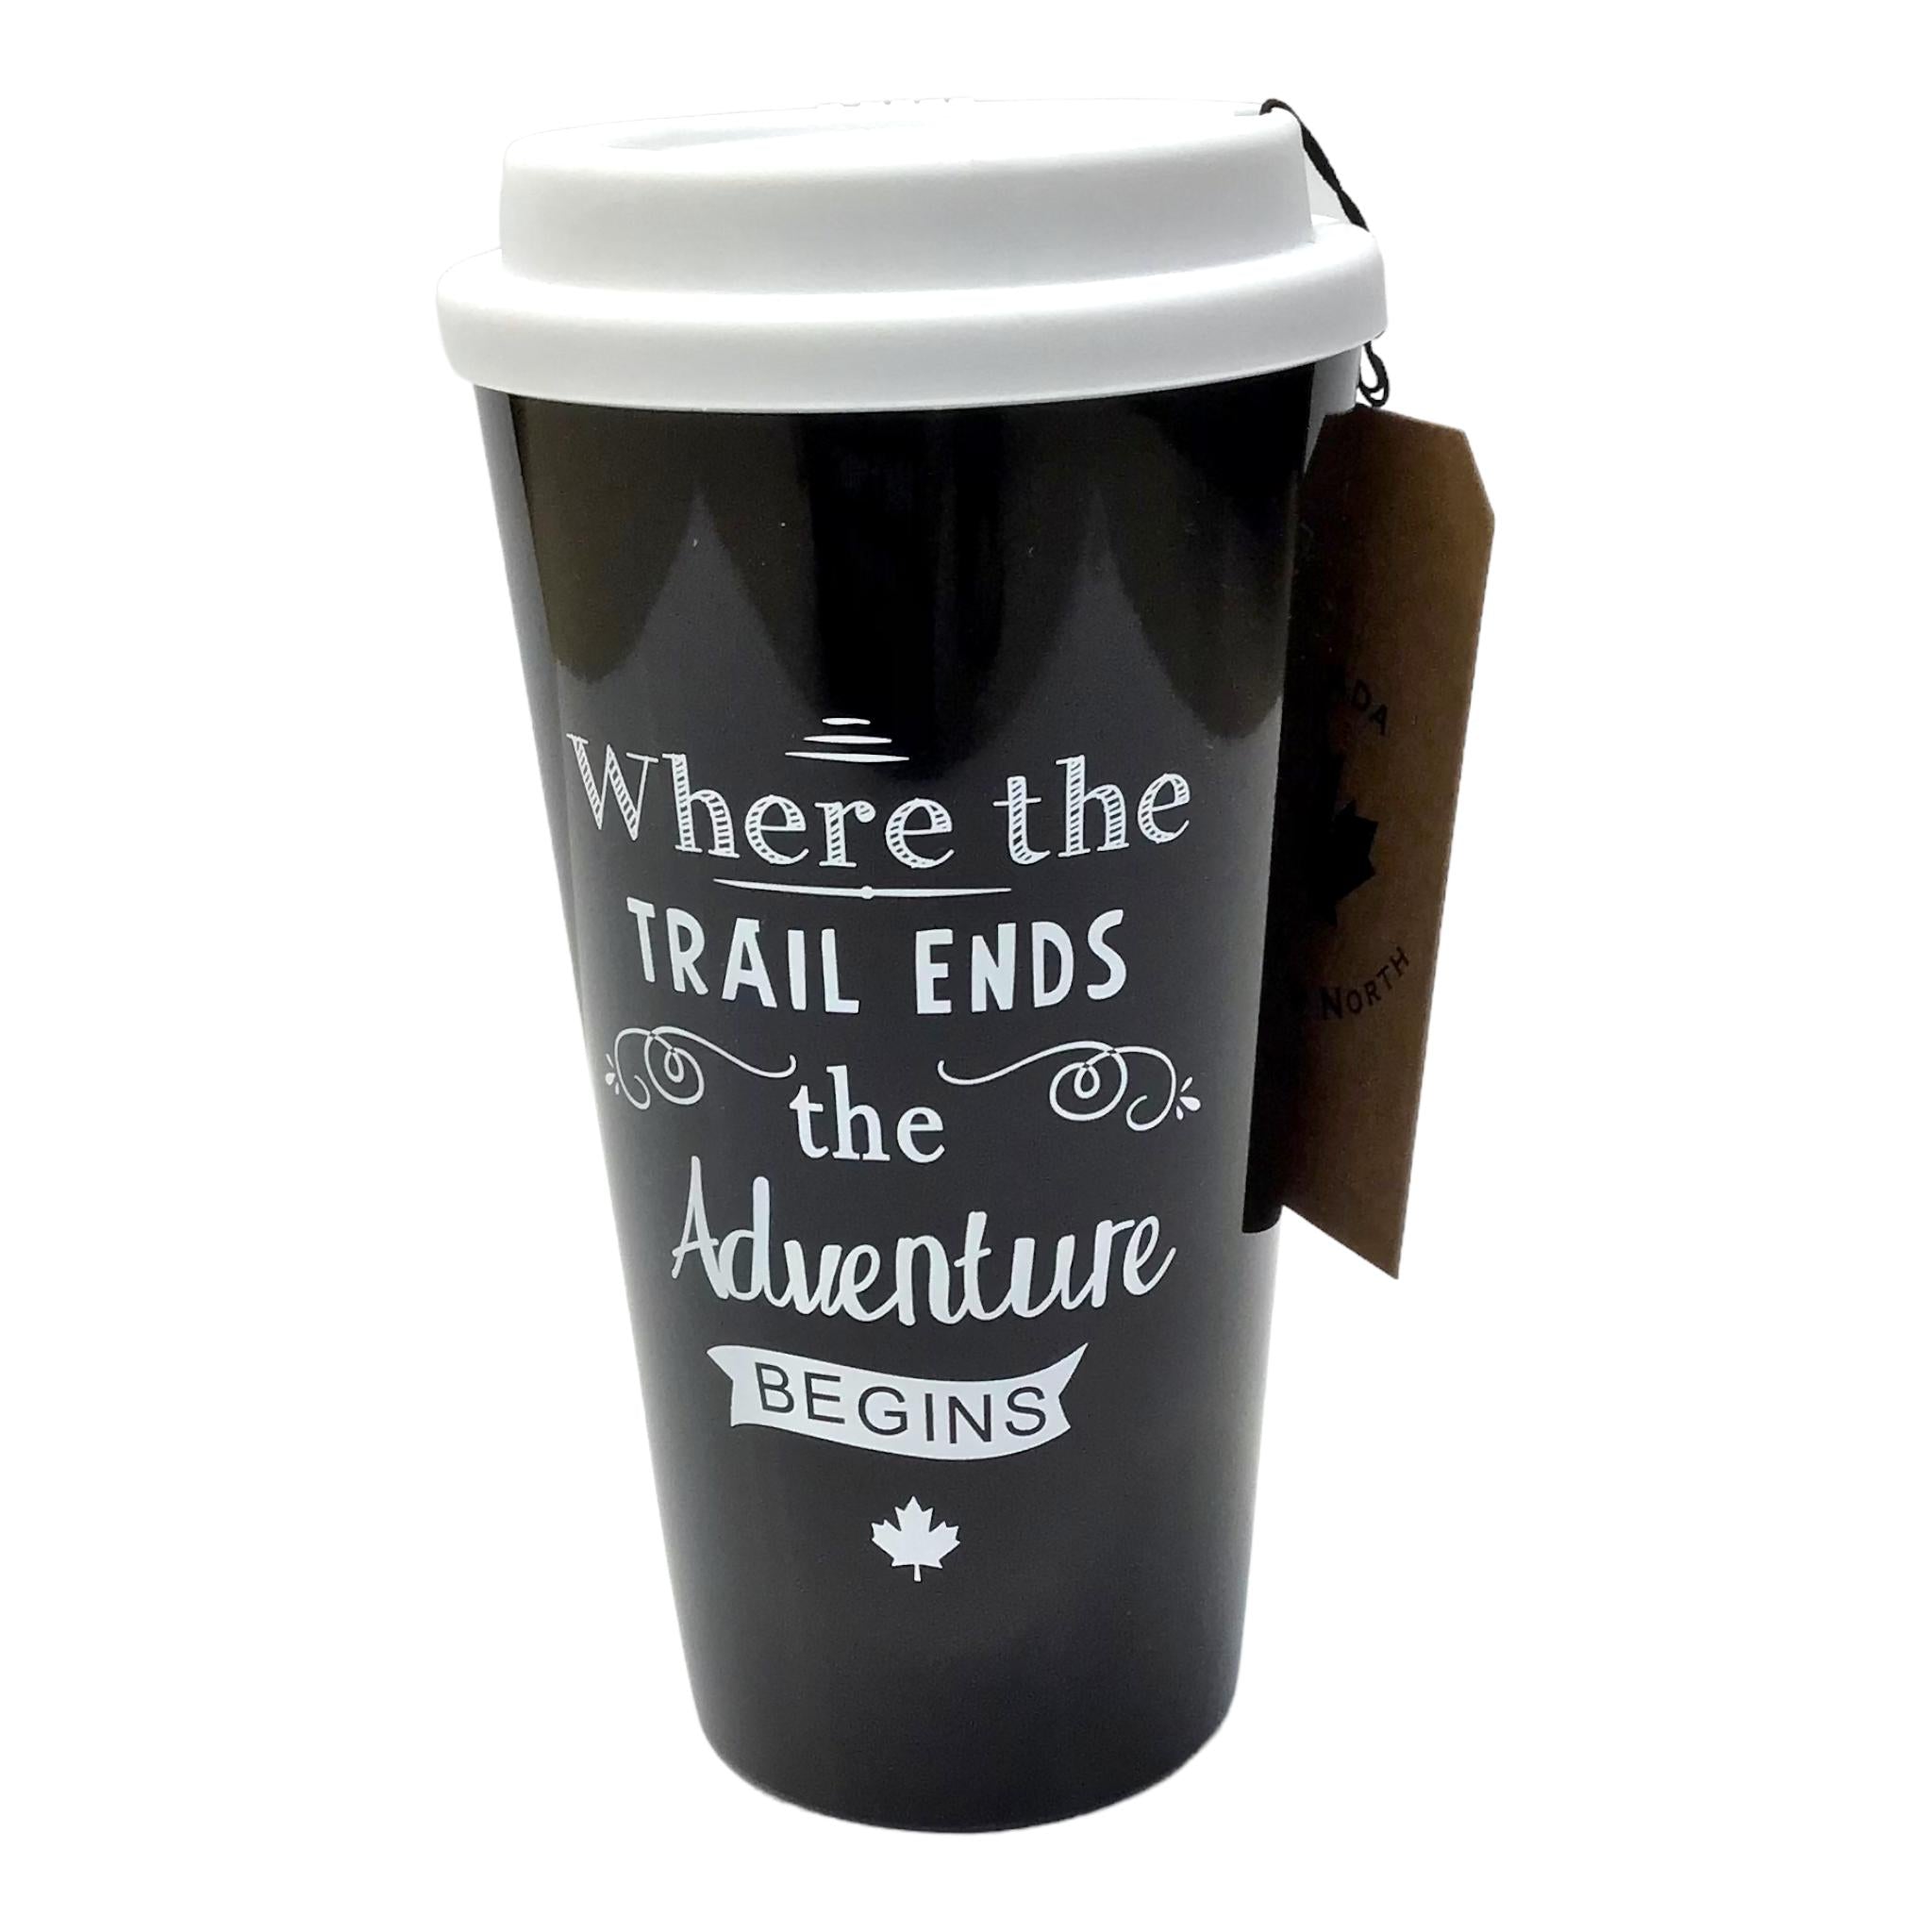 Take It to Go with Lids Reusable Plastic Canada Travel Cups Mugs, Hot Cold Drinks